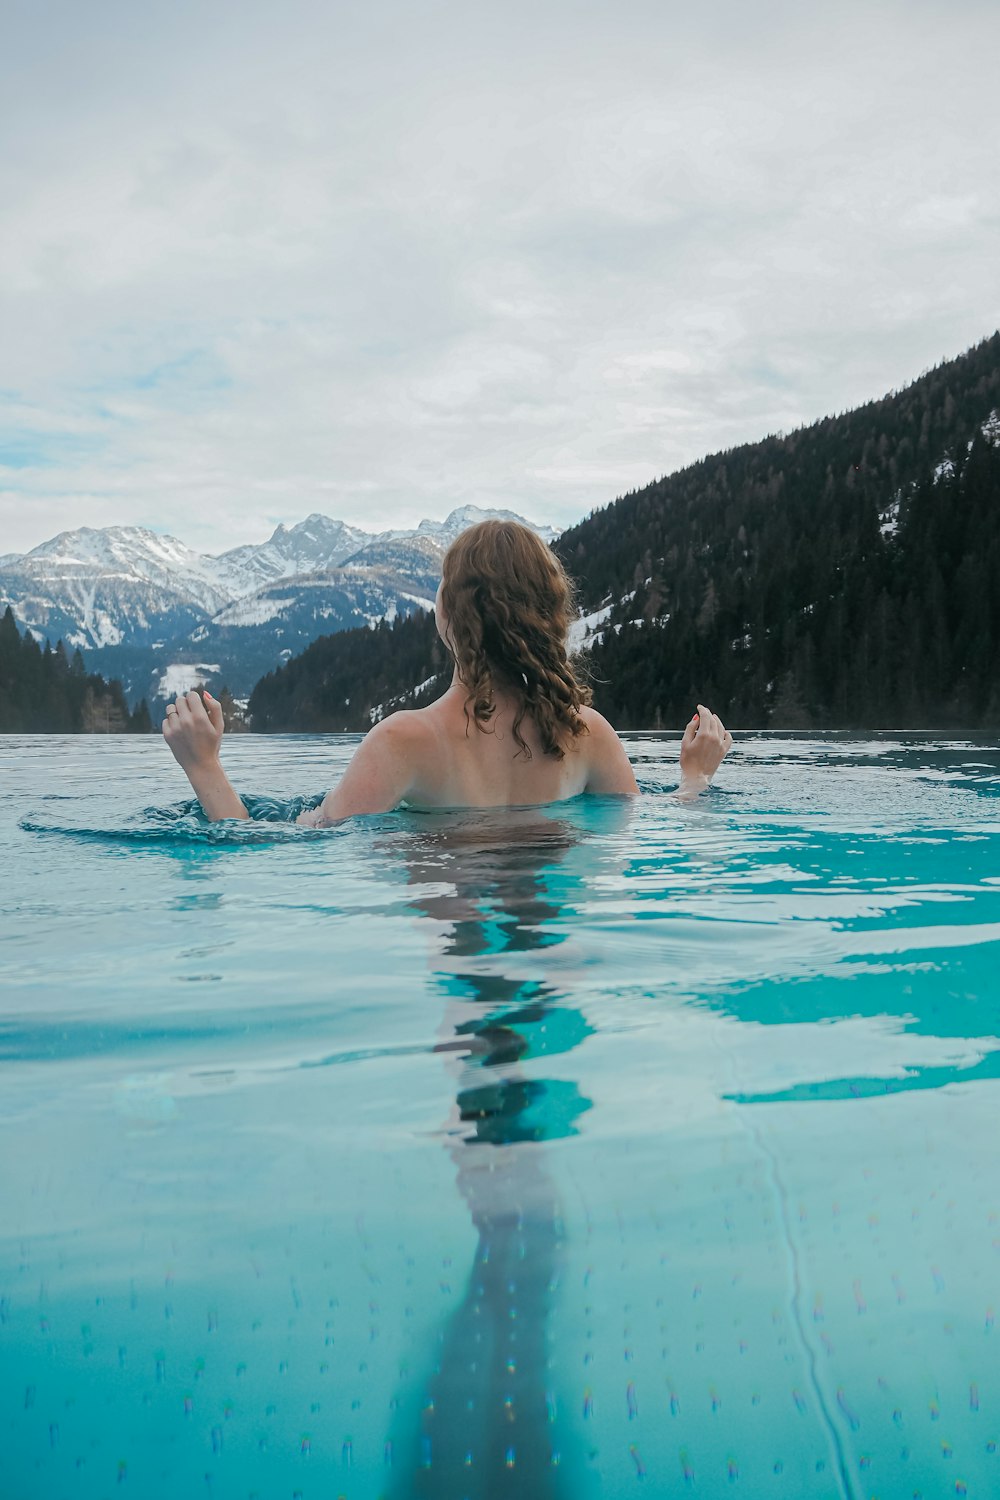 a woman swimming in a pool with mountains in the background